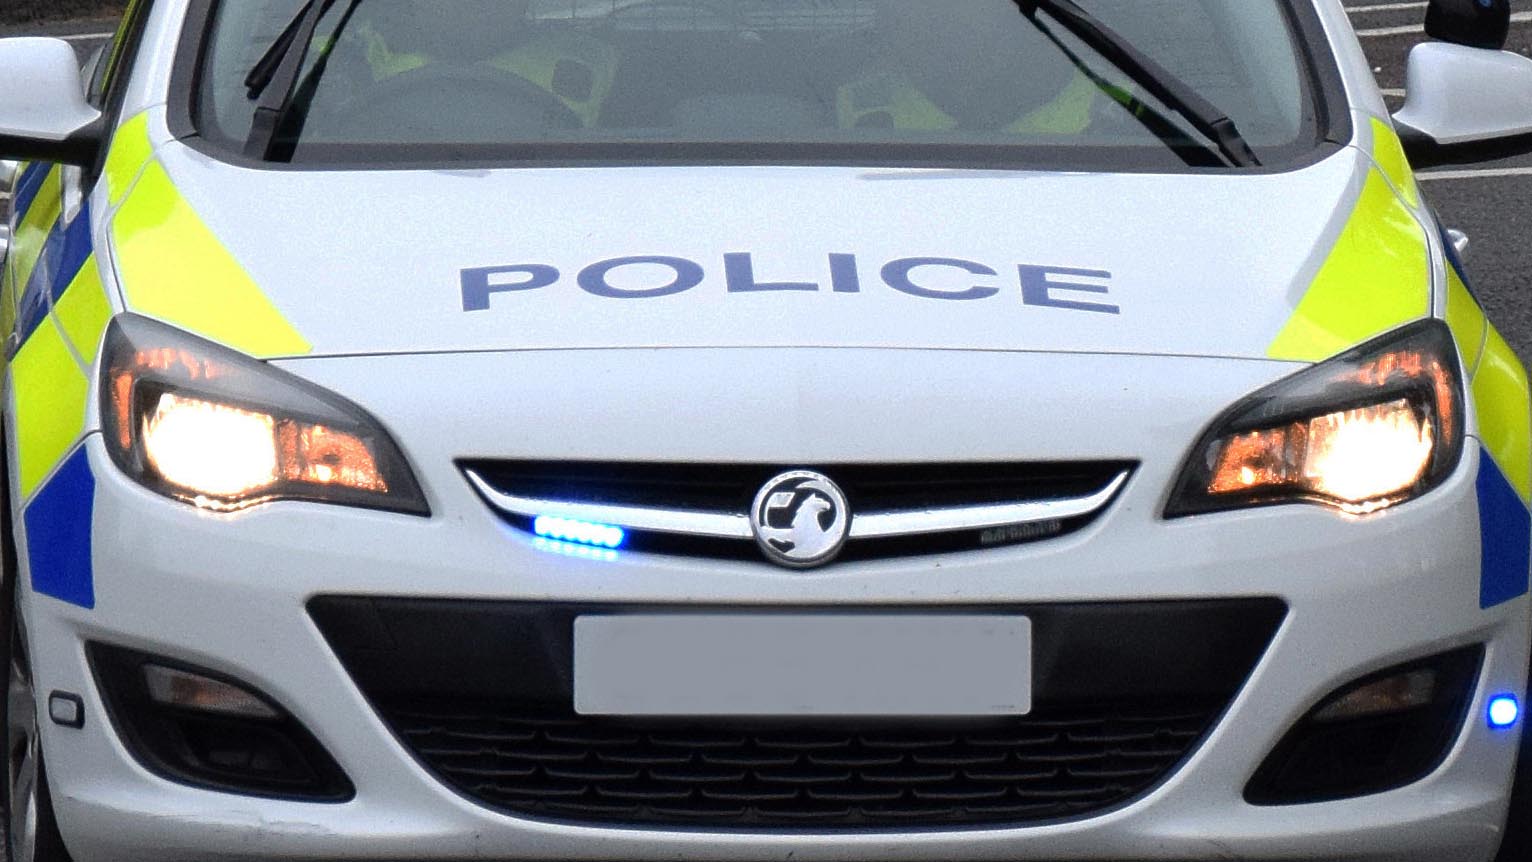 Man Has been Arrested and Charged for committing Multiple Burglaries across Hertfordshire